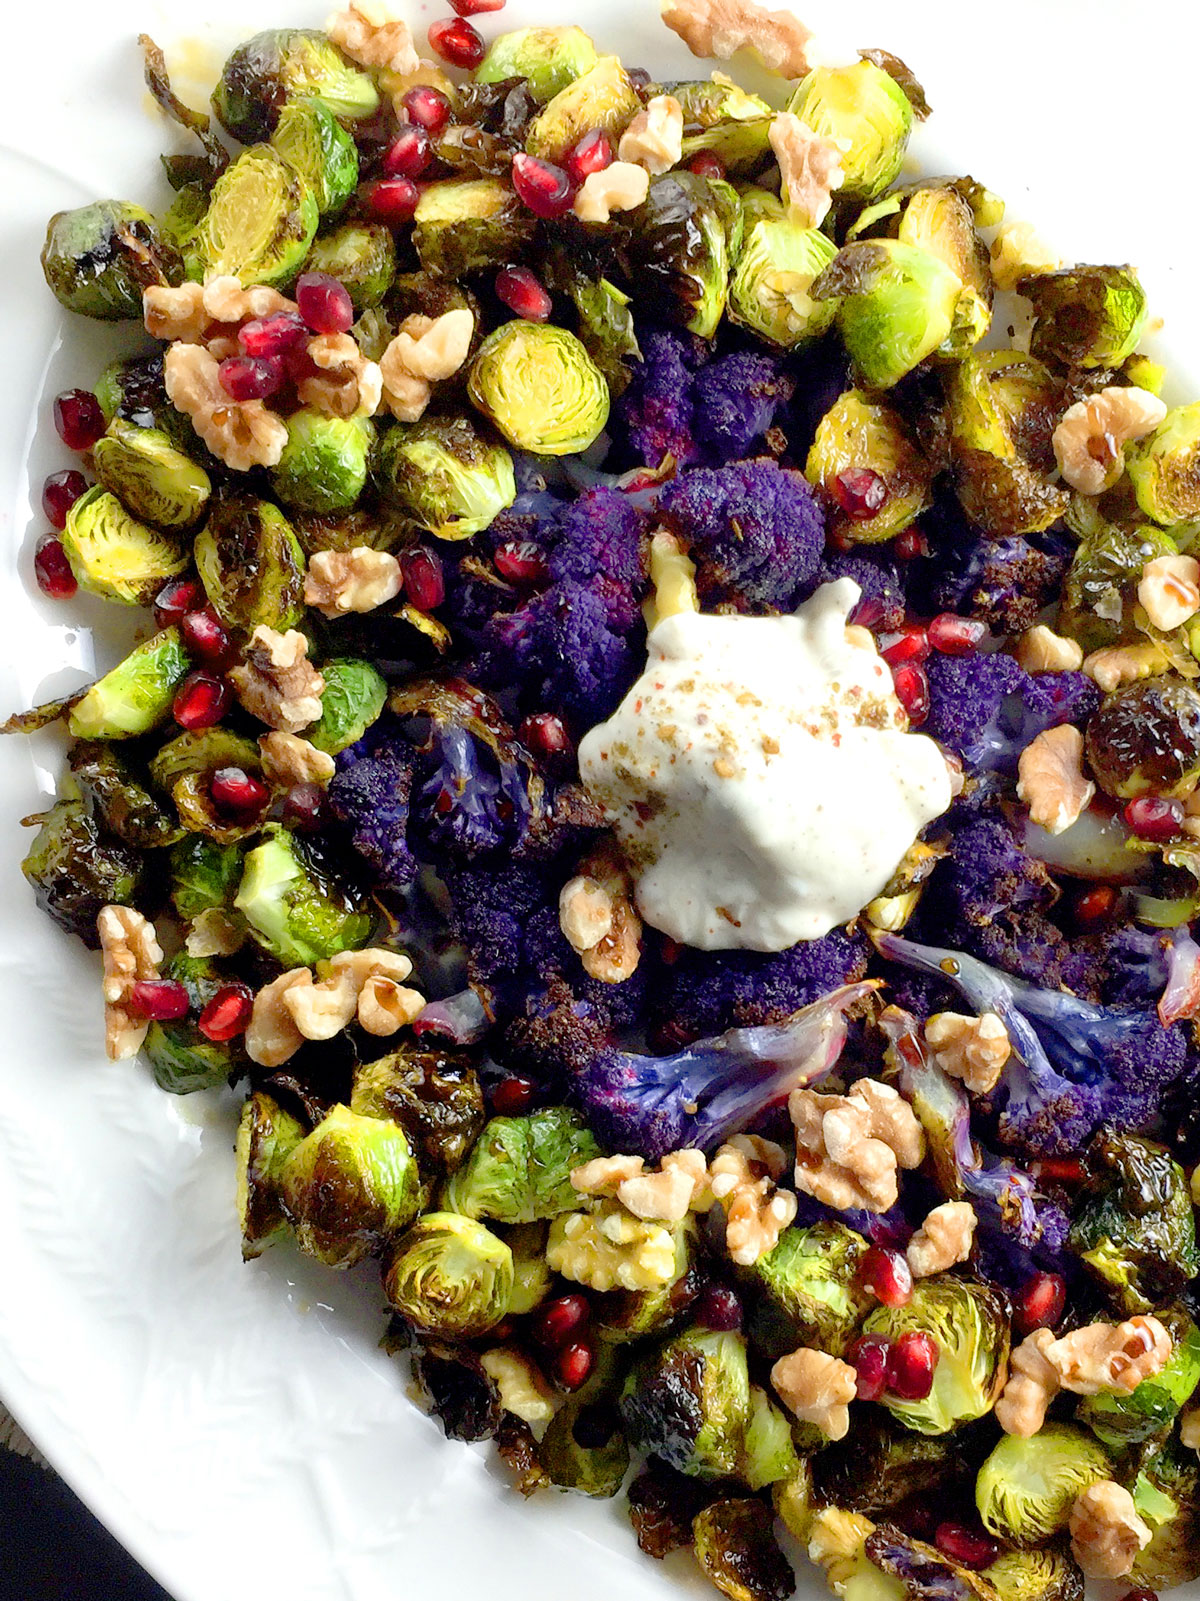 Brussels and cauliflower on a white plate with a yogurt sauce in the center.